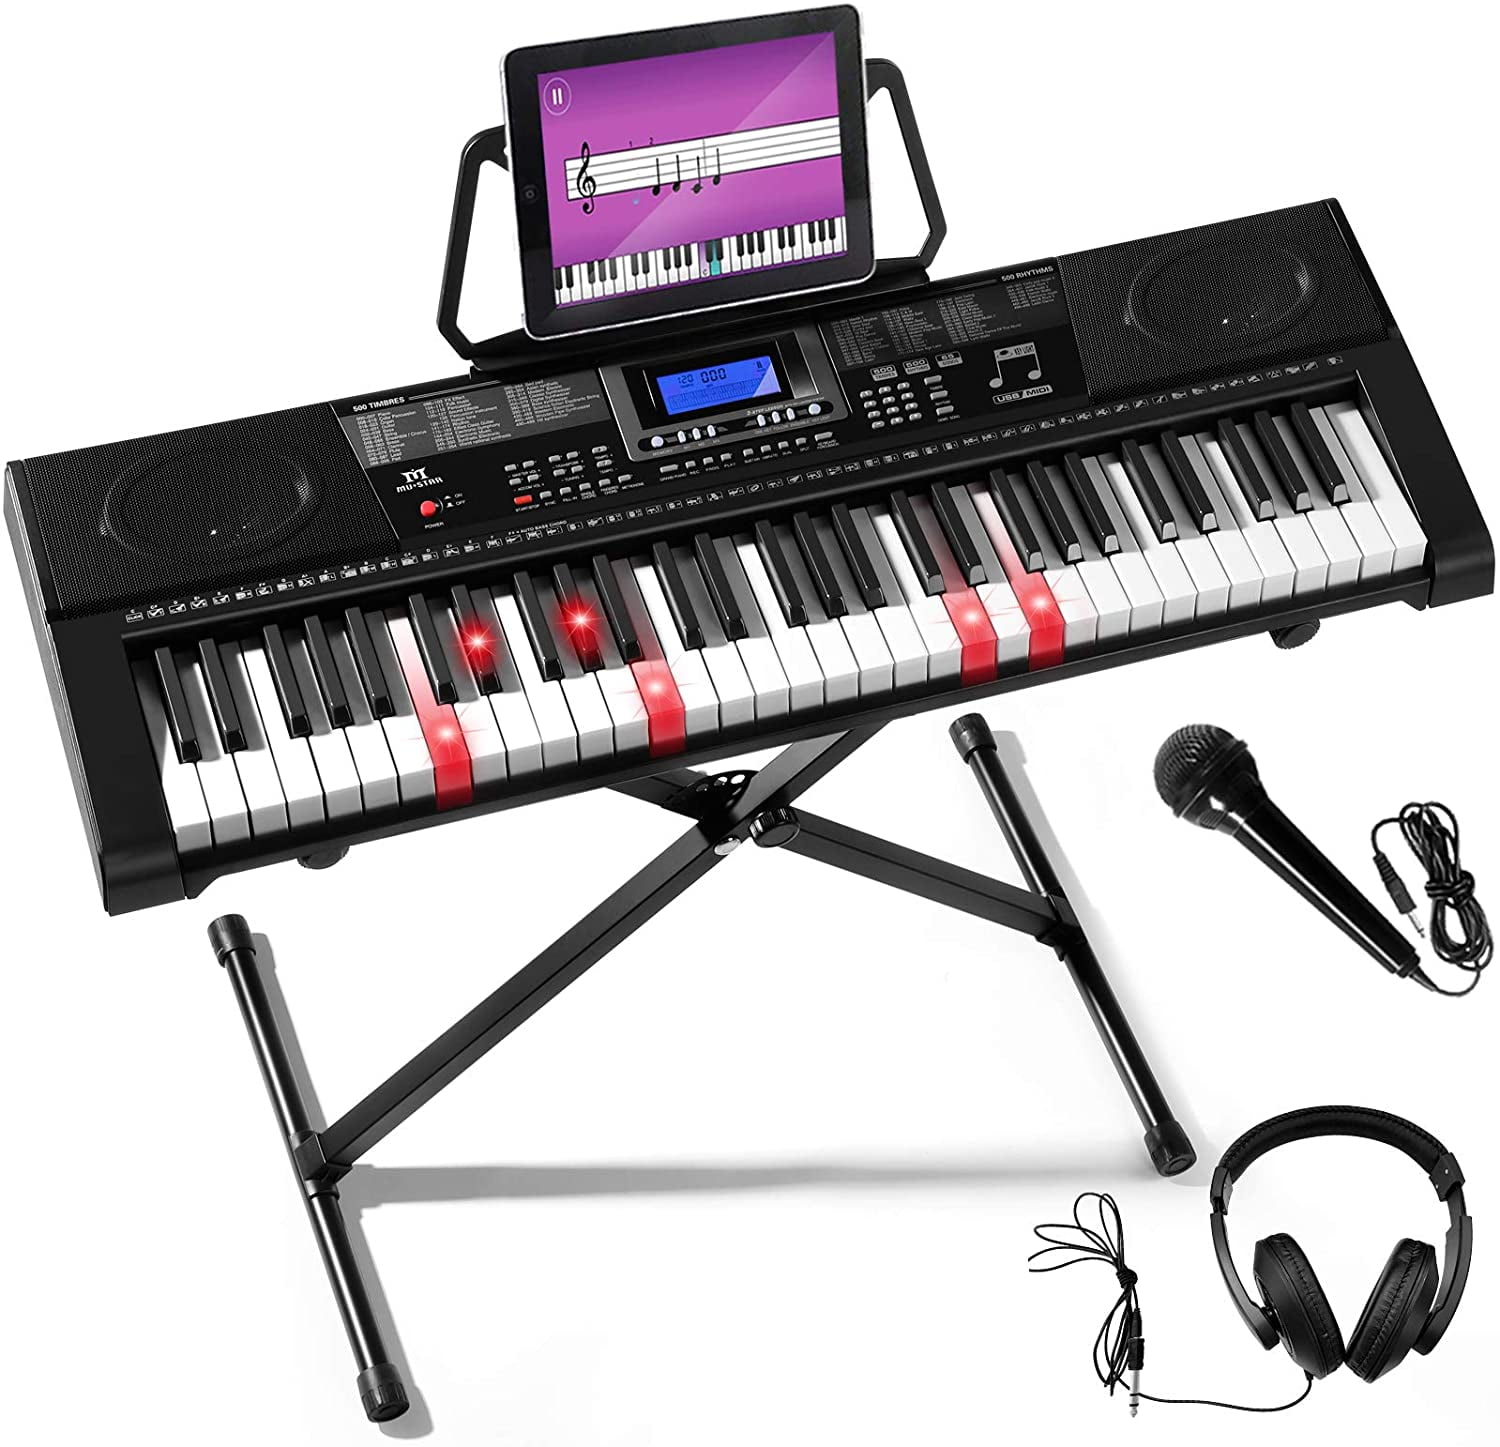 Cute Stone 5 in 1 Musical Instruments Toys Kids Electronic Piano Keyboard Drum 2 for sale online 